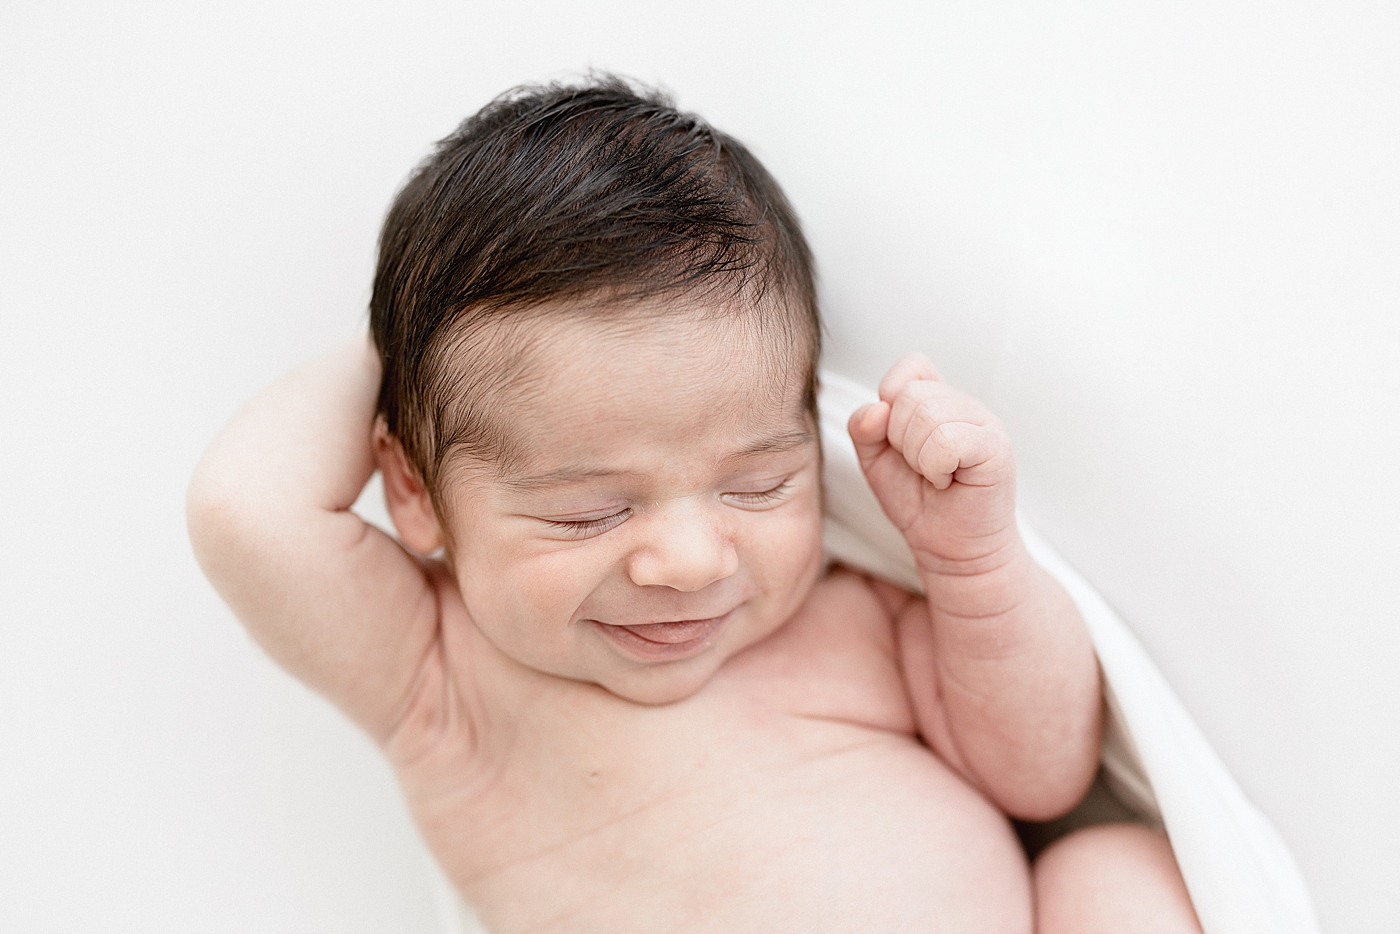 Baby smiling during newborn photos in Tampa photography studio. Photo by Brittany Elise Photography.